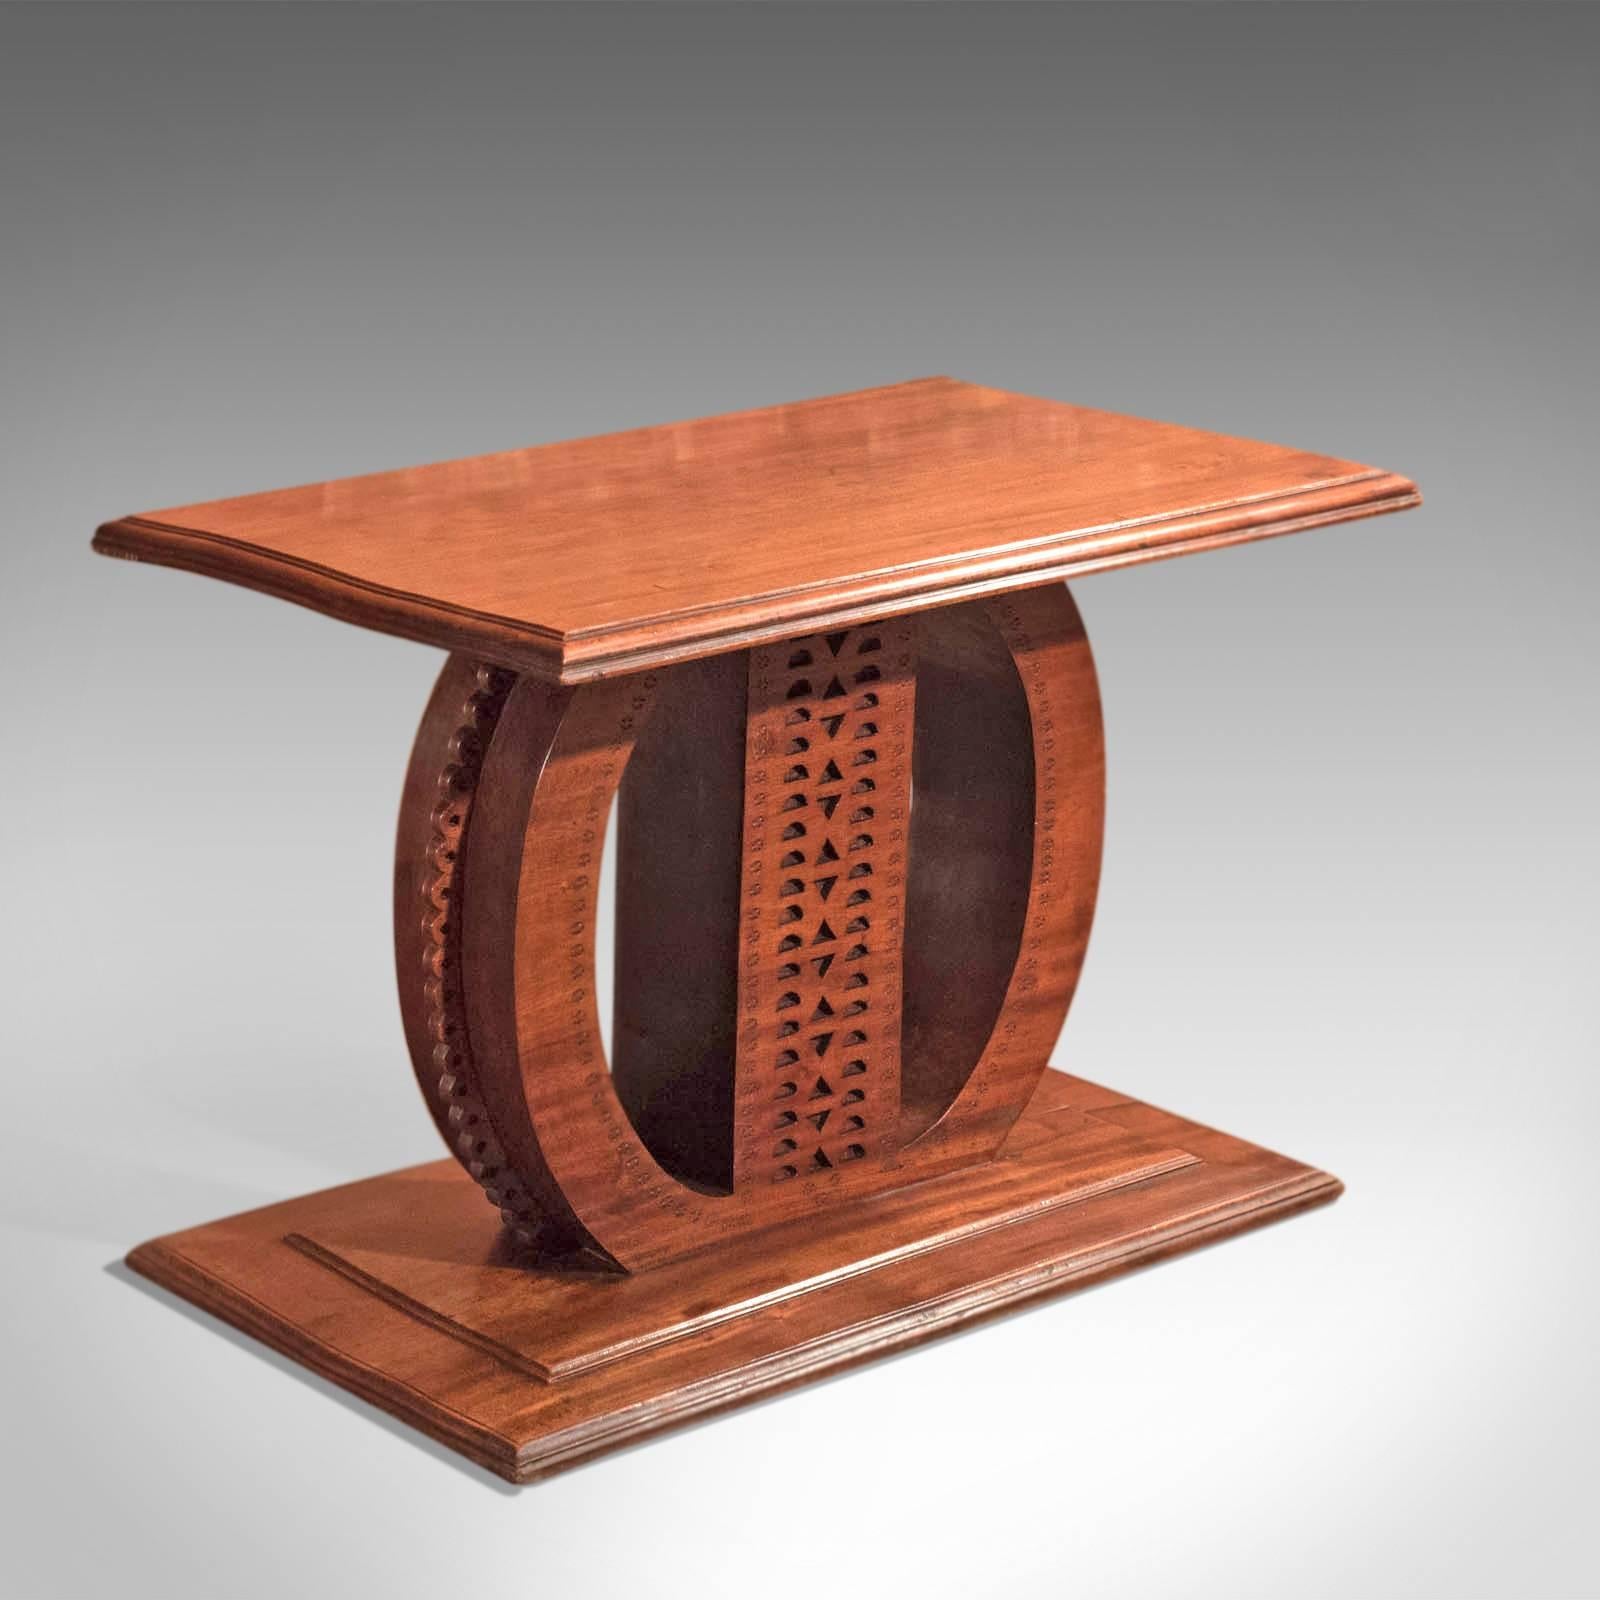 This is an antique, 19th century hardwood table.

Of immense weight, carved from a single piece of hardwood, this exotic piece makes for an interesting side or lamp table.

The stepped plinth base mirrors the top bringing symmetry to the piece